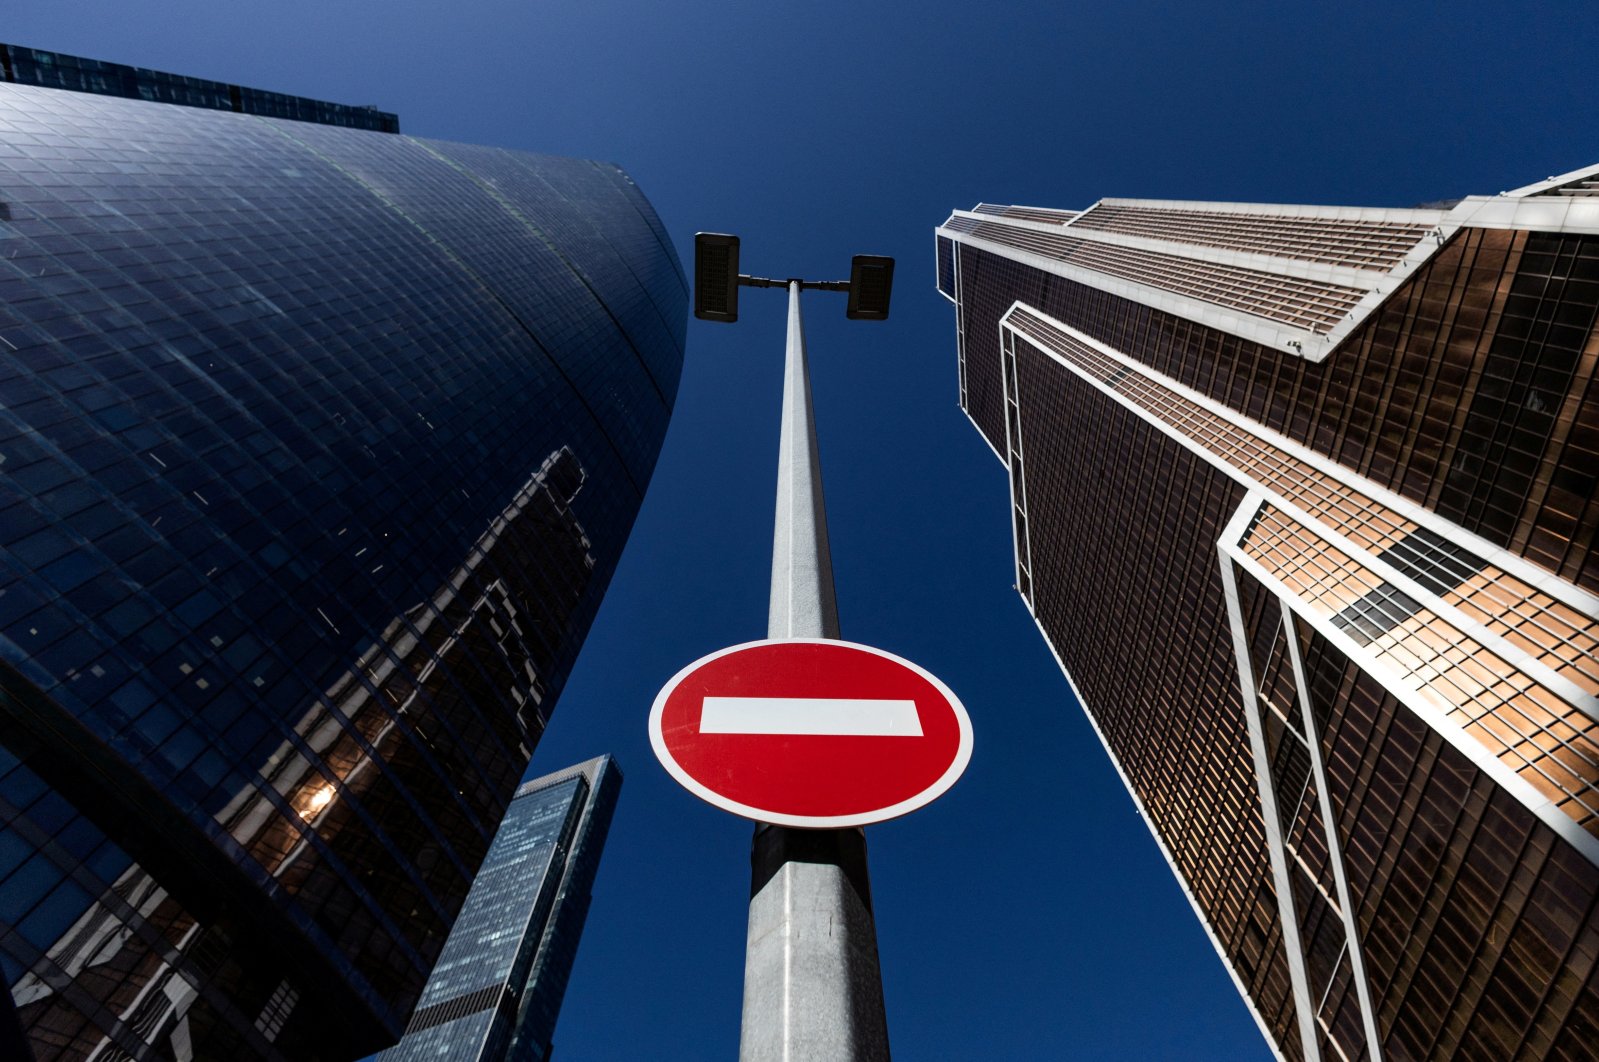 A stop road sign is seen next to skyscrapers at Moscow International business center, also known as "Moskva-City," in Moscow, Russia, April 14, 2022. (Reuters Photo)